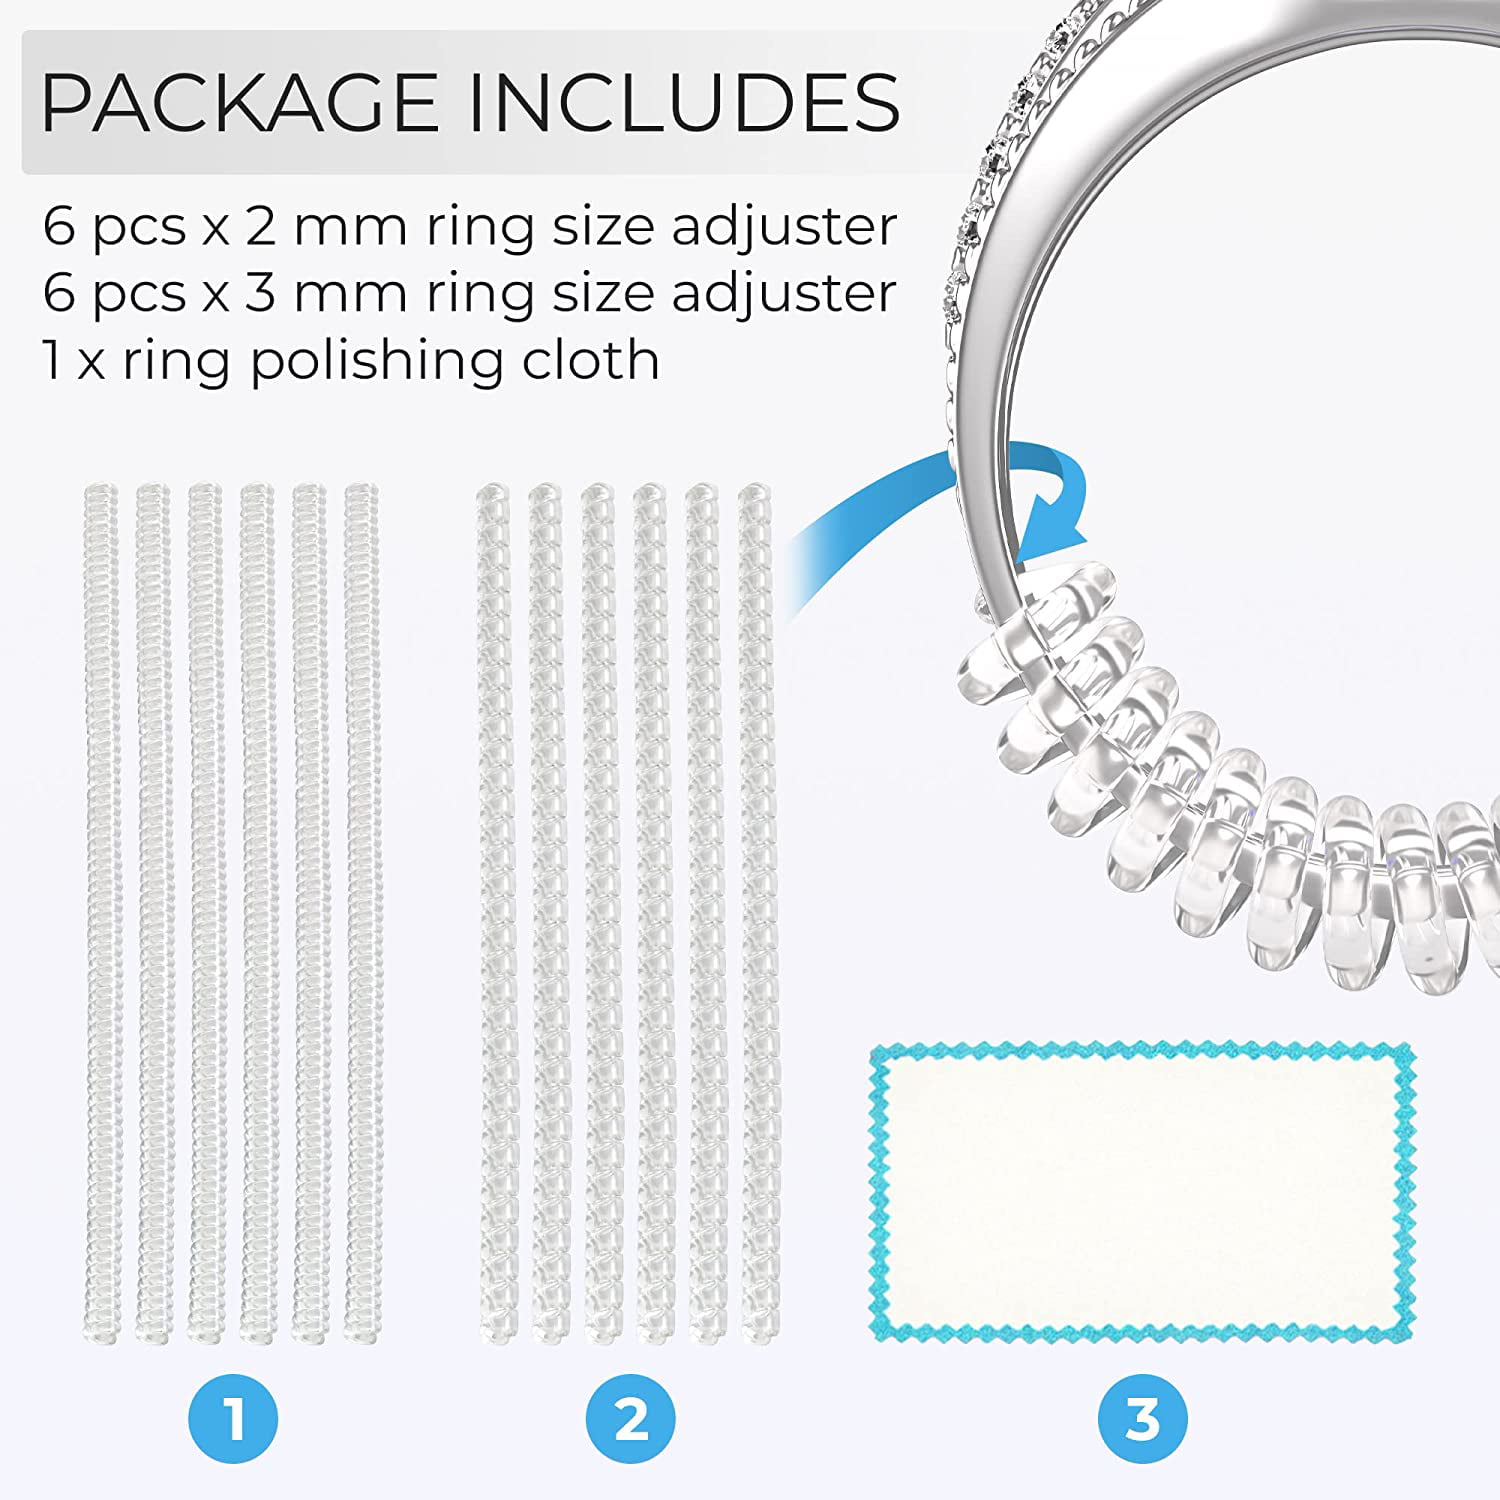 flintronic 12Pcs Invisible Ring Size Adjuster, Spiral Silicone